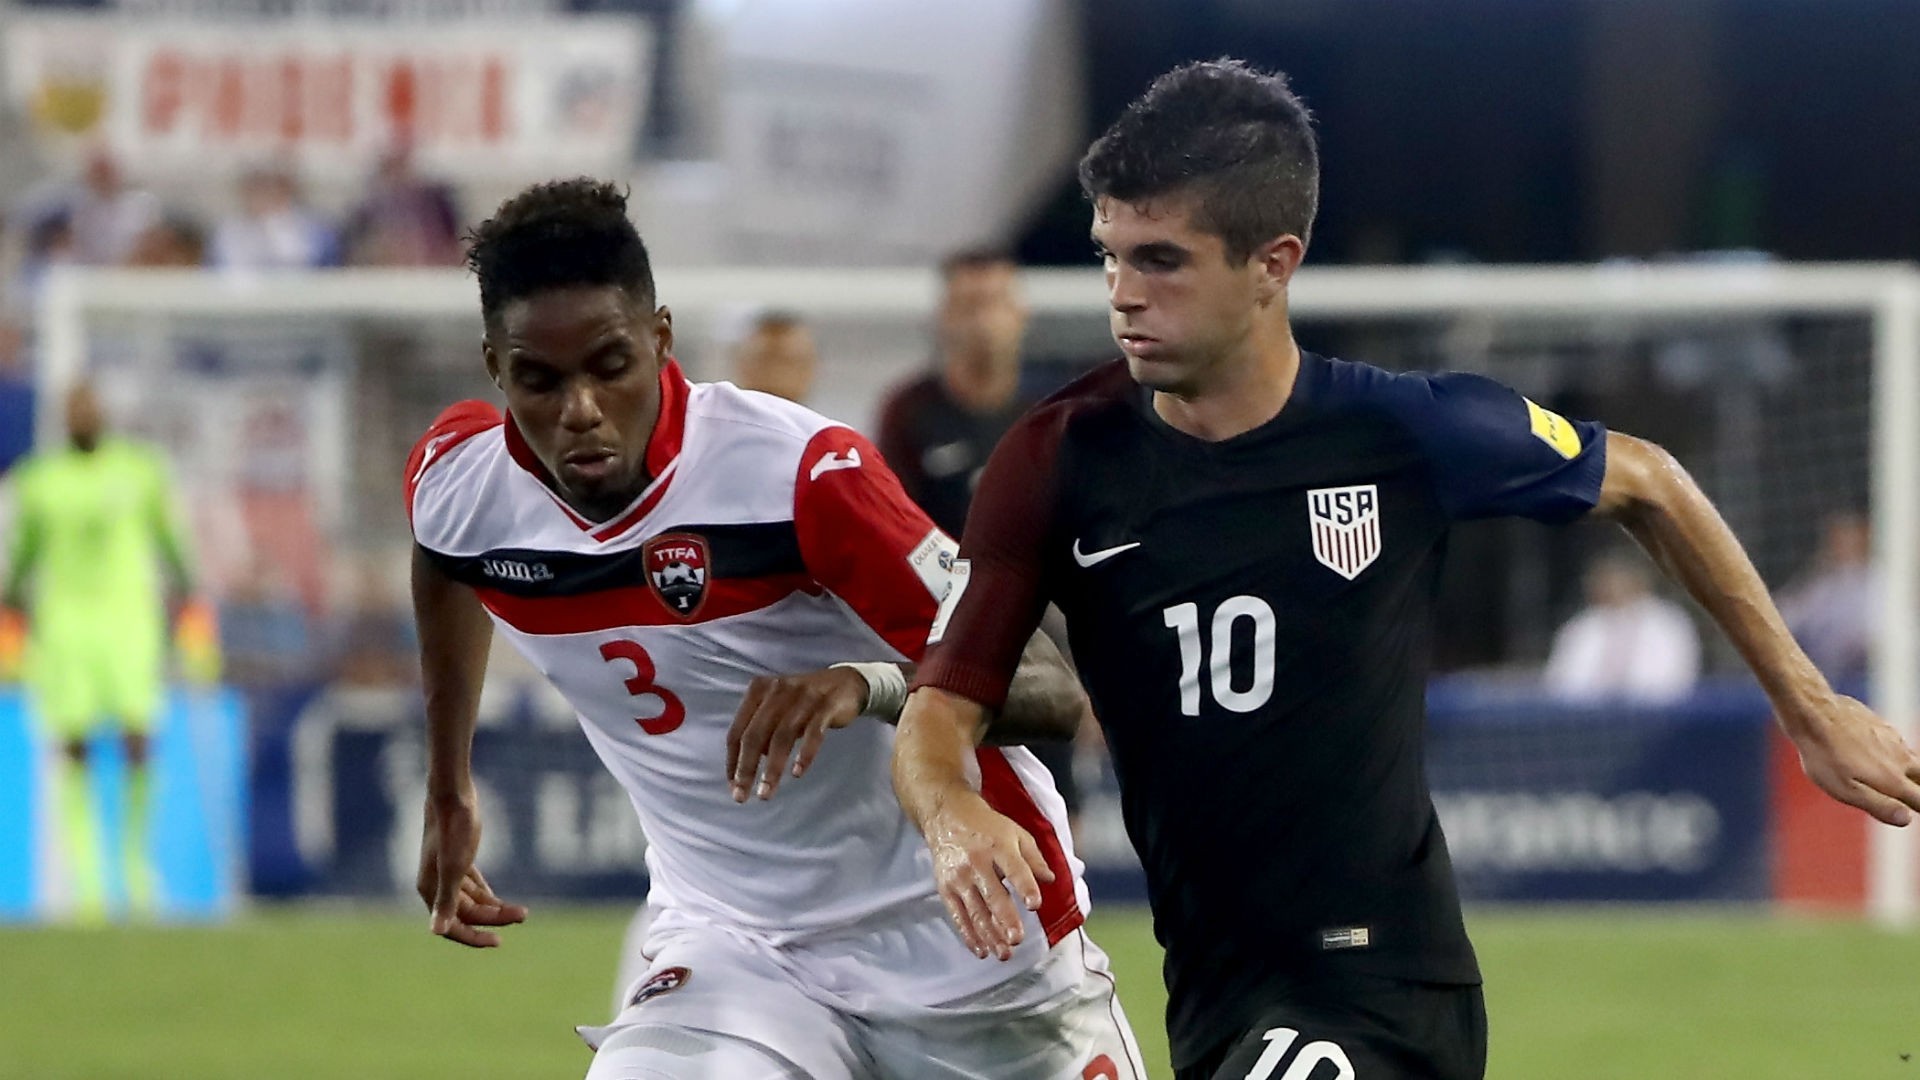 United States and Mexico to begin play in CONCACAF Nations League in 2019